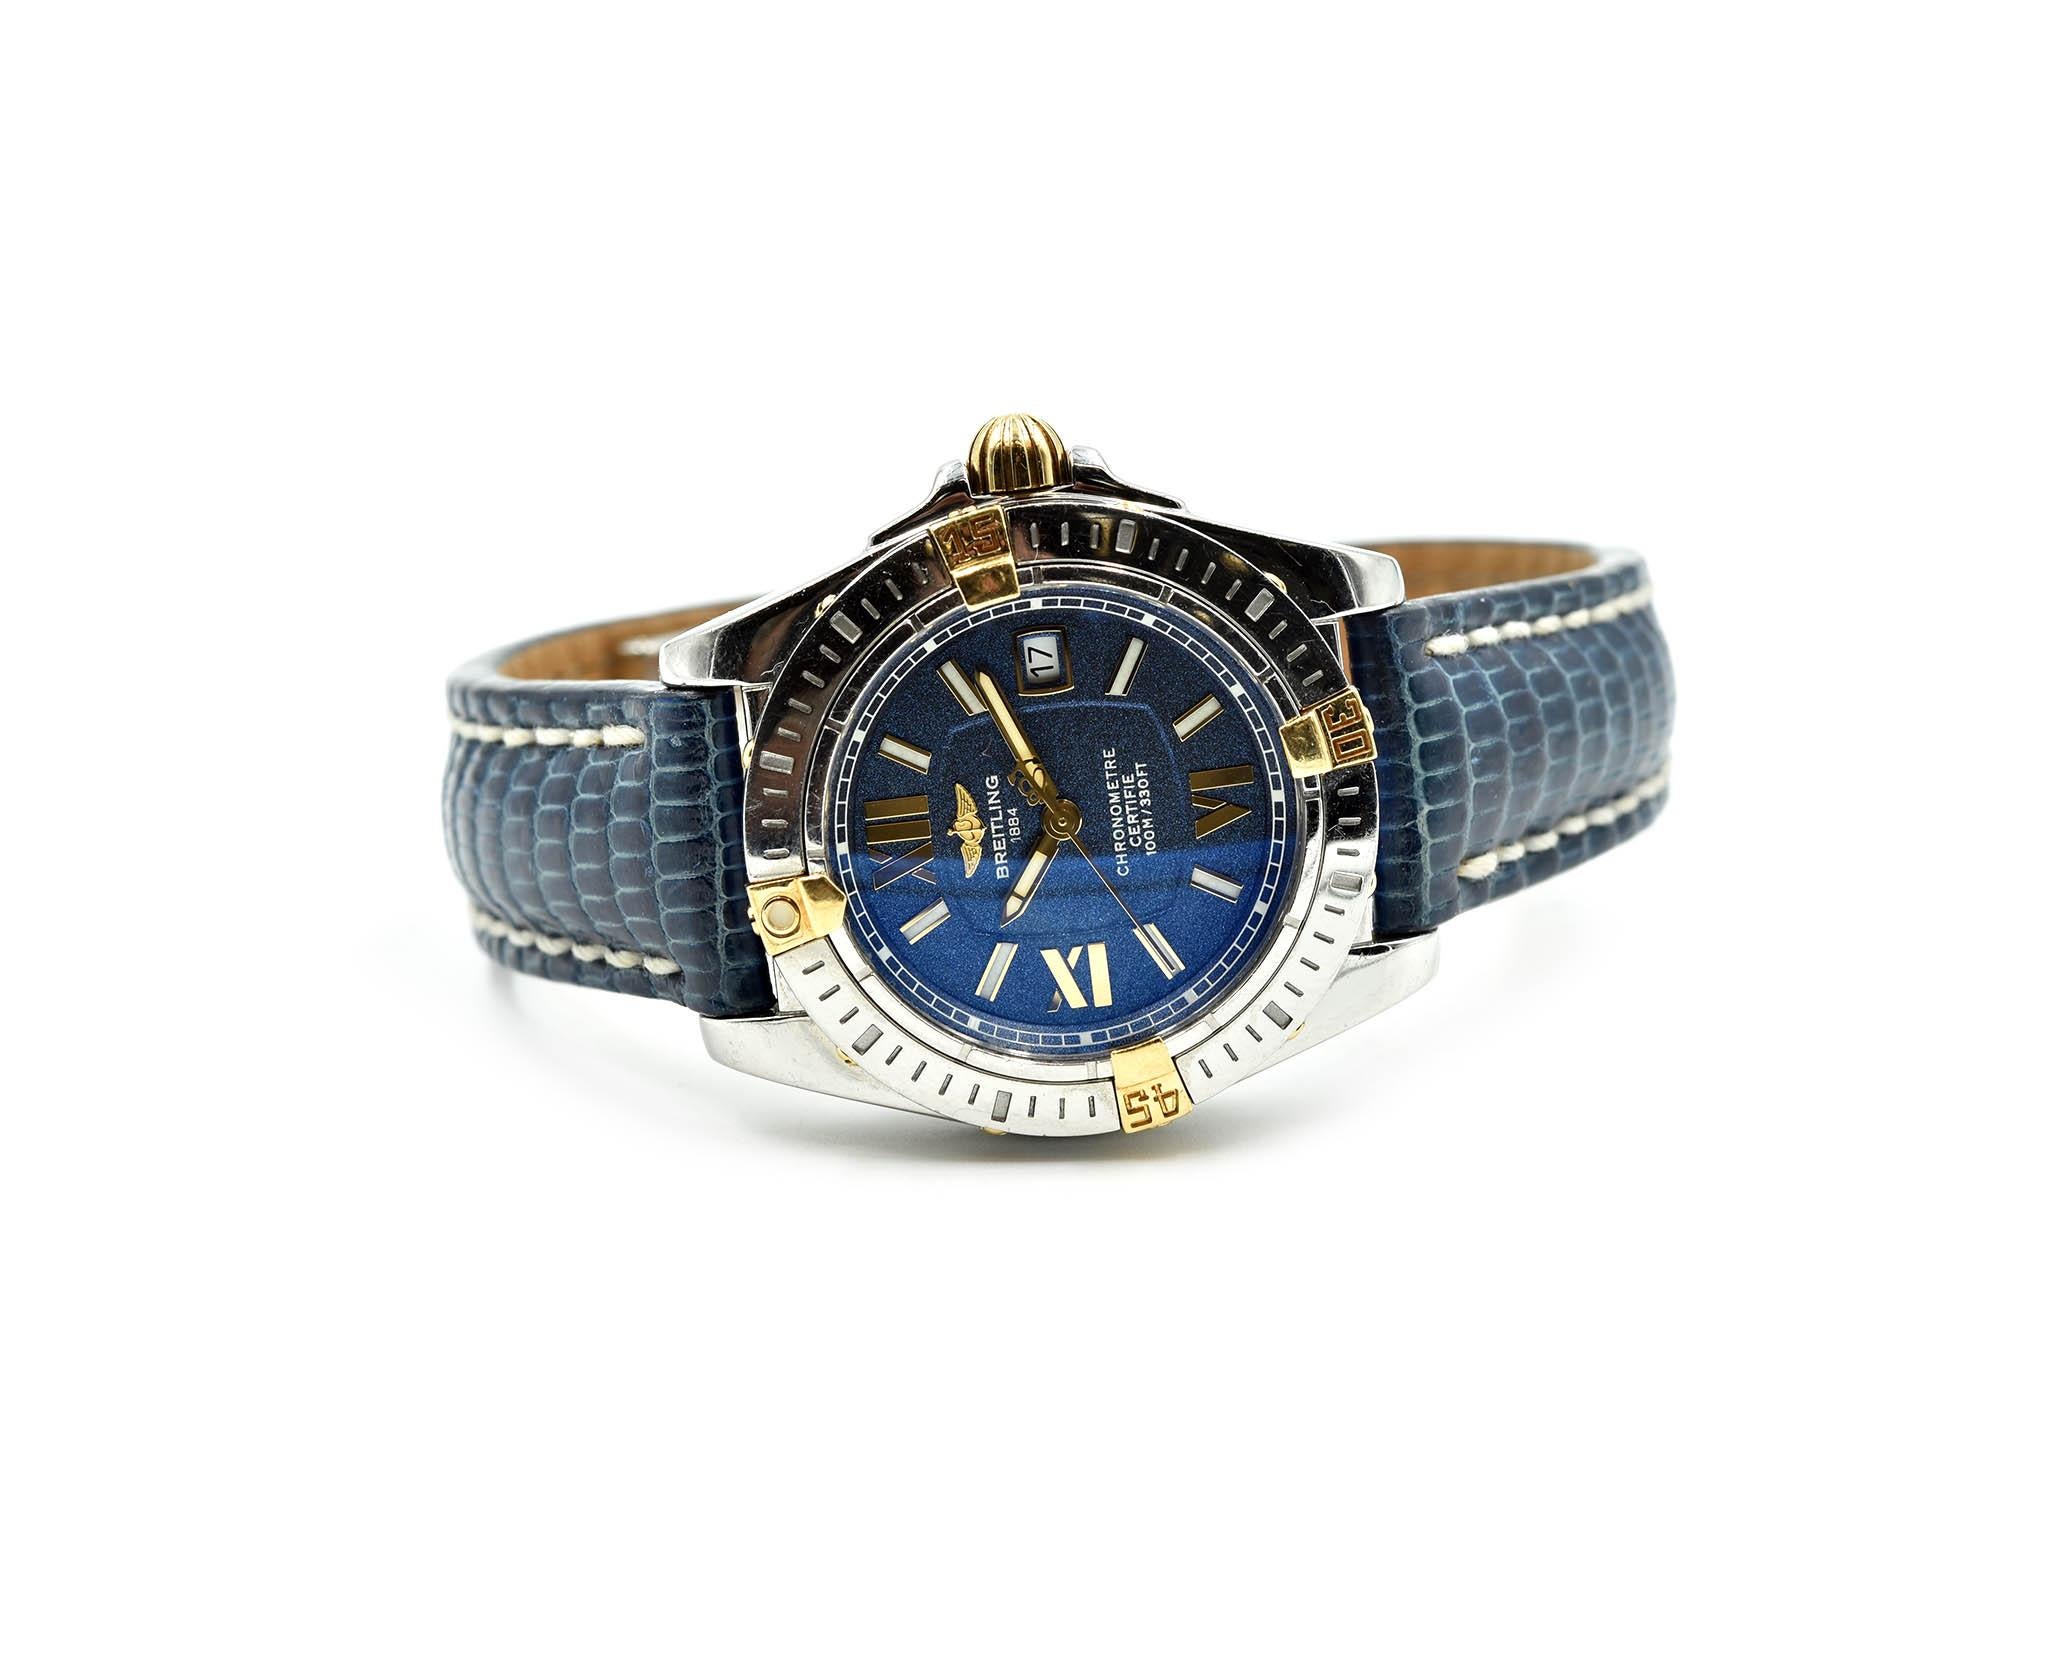 Movement: quartz
Function: hours, minutes, seconds, date
Case: round 31.8mm stainless steel case with 18k yellow gold accented dive bezel, sapphire protective crystal, 18k yellow gold pull/push crown, water resistant to 30 meters
Band: factory blue